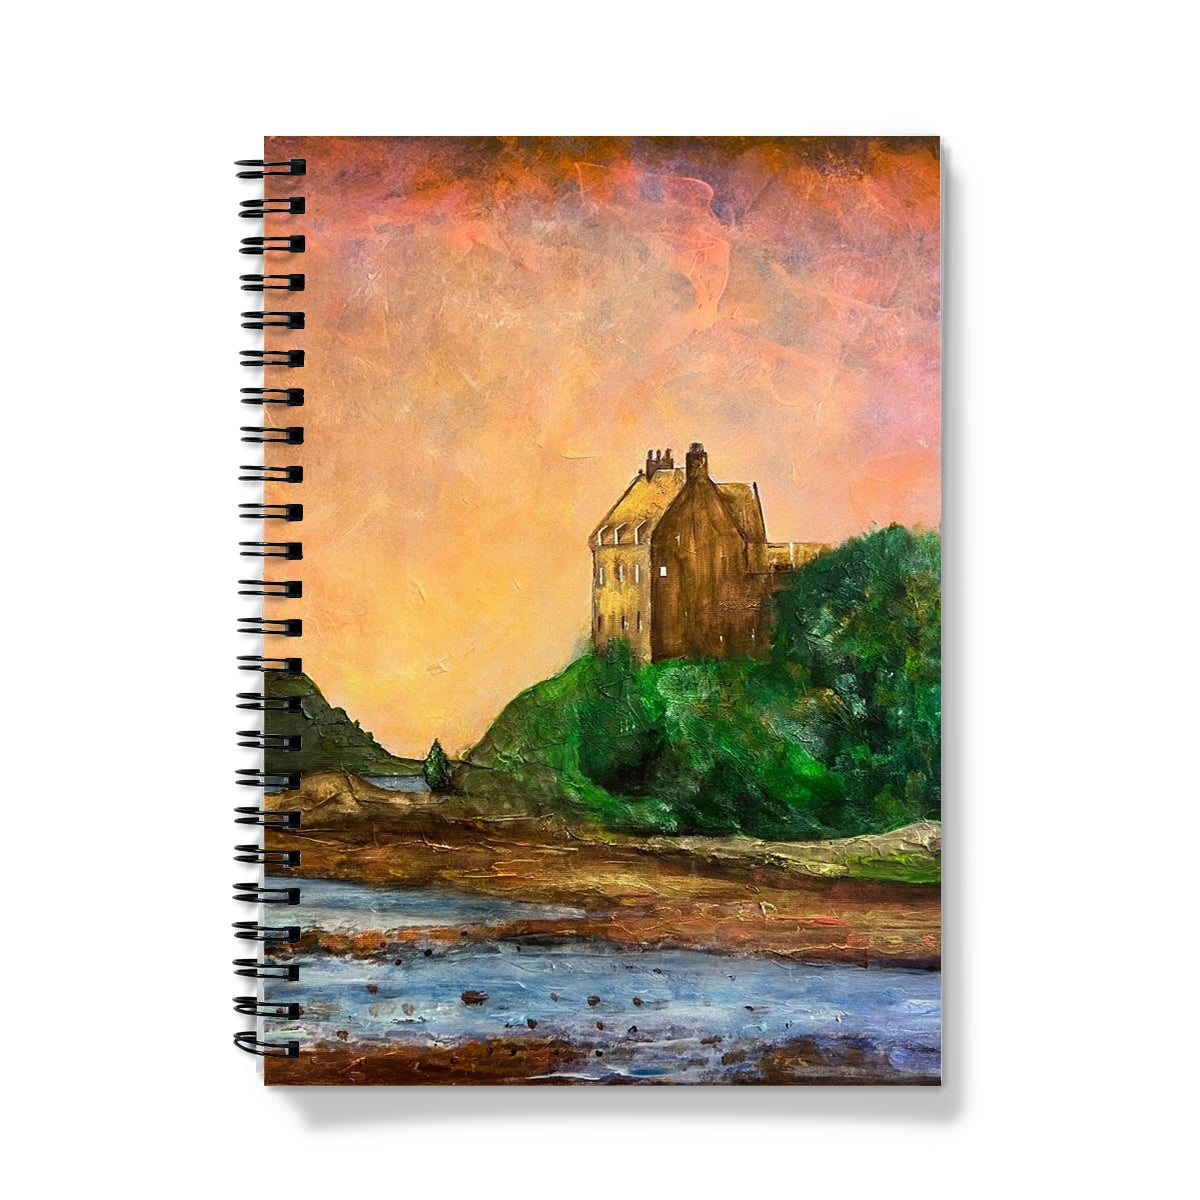 Duntrune Castle Art Gifts Notebook-Journals & Notebooks-Historic & Iconic Scotland Art Gallery-A4-Lined-Paintings, Prints, Homeware, Art Gifts From Scotland By Scottish Artist Kevin Hunter